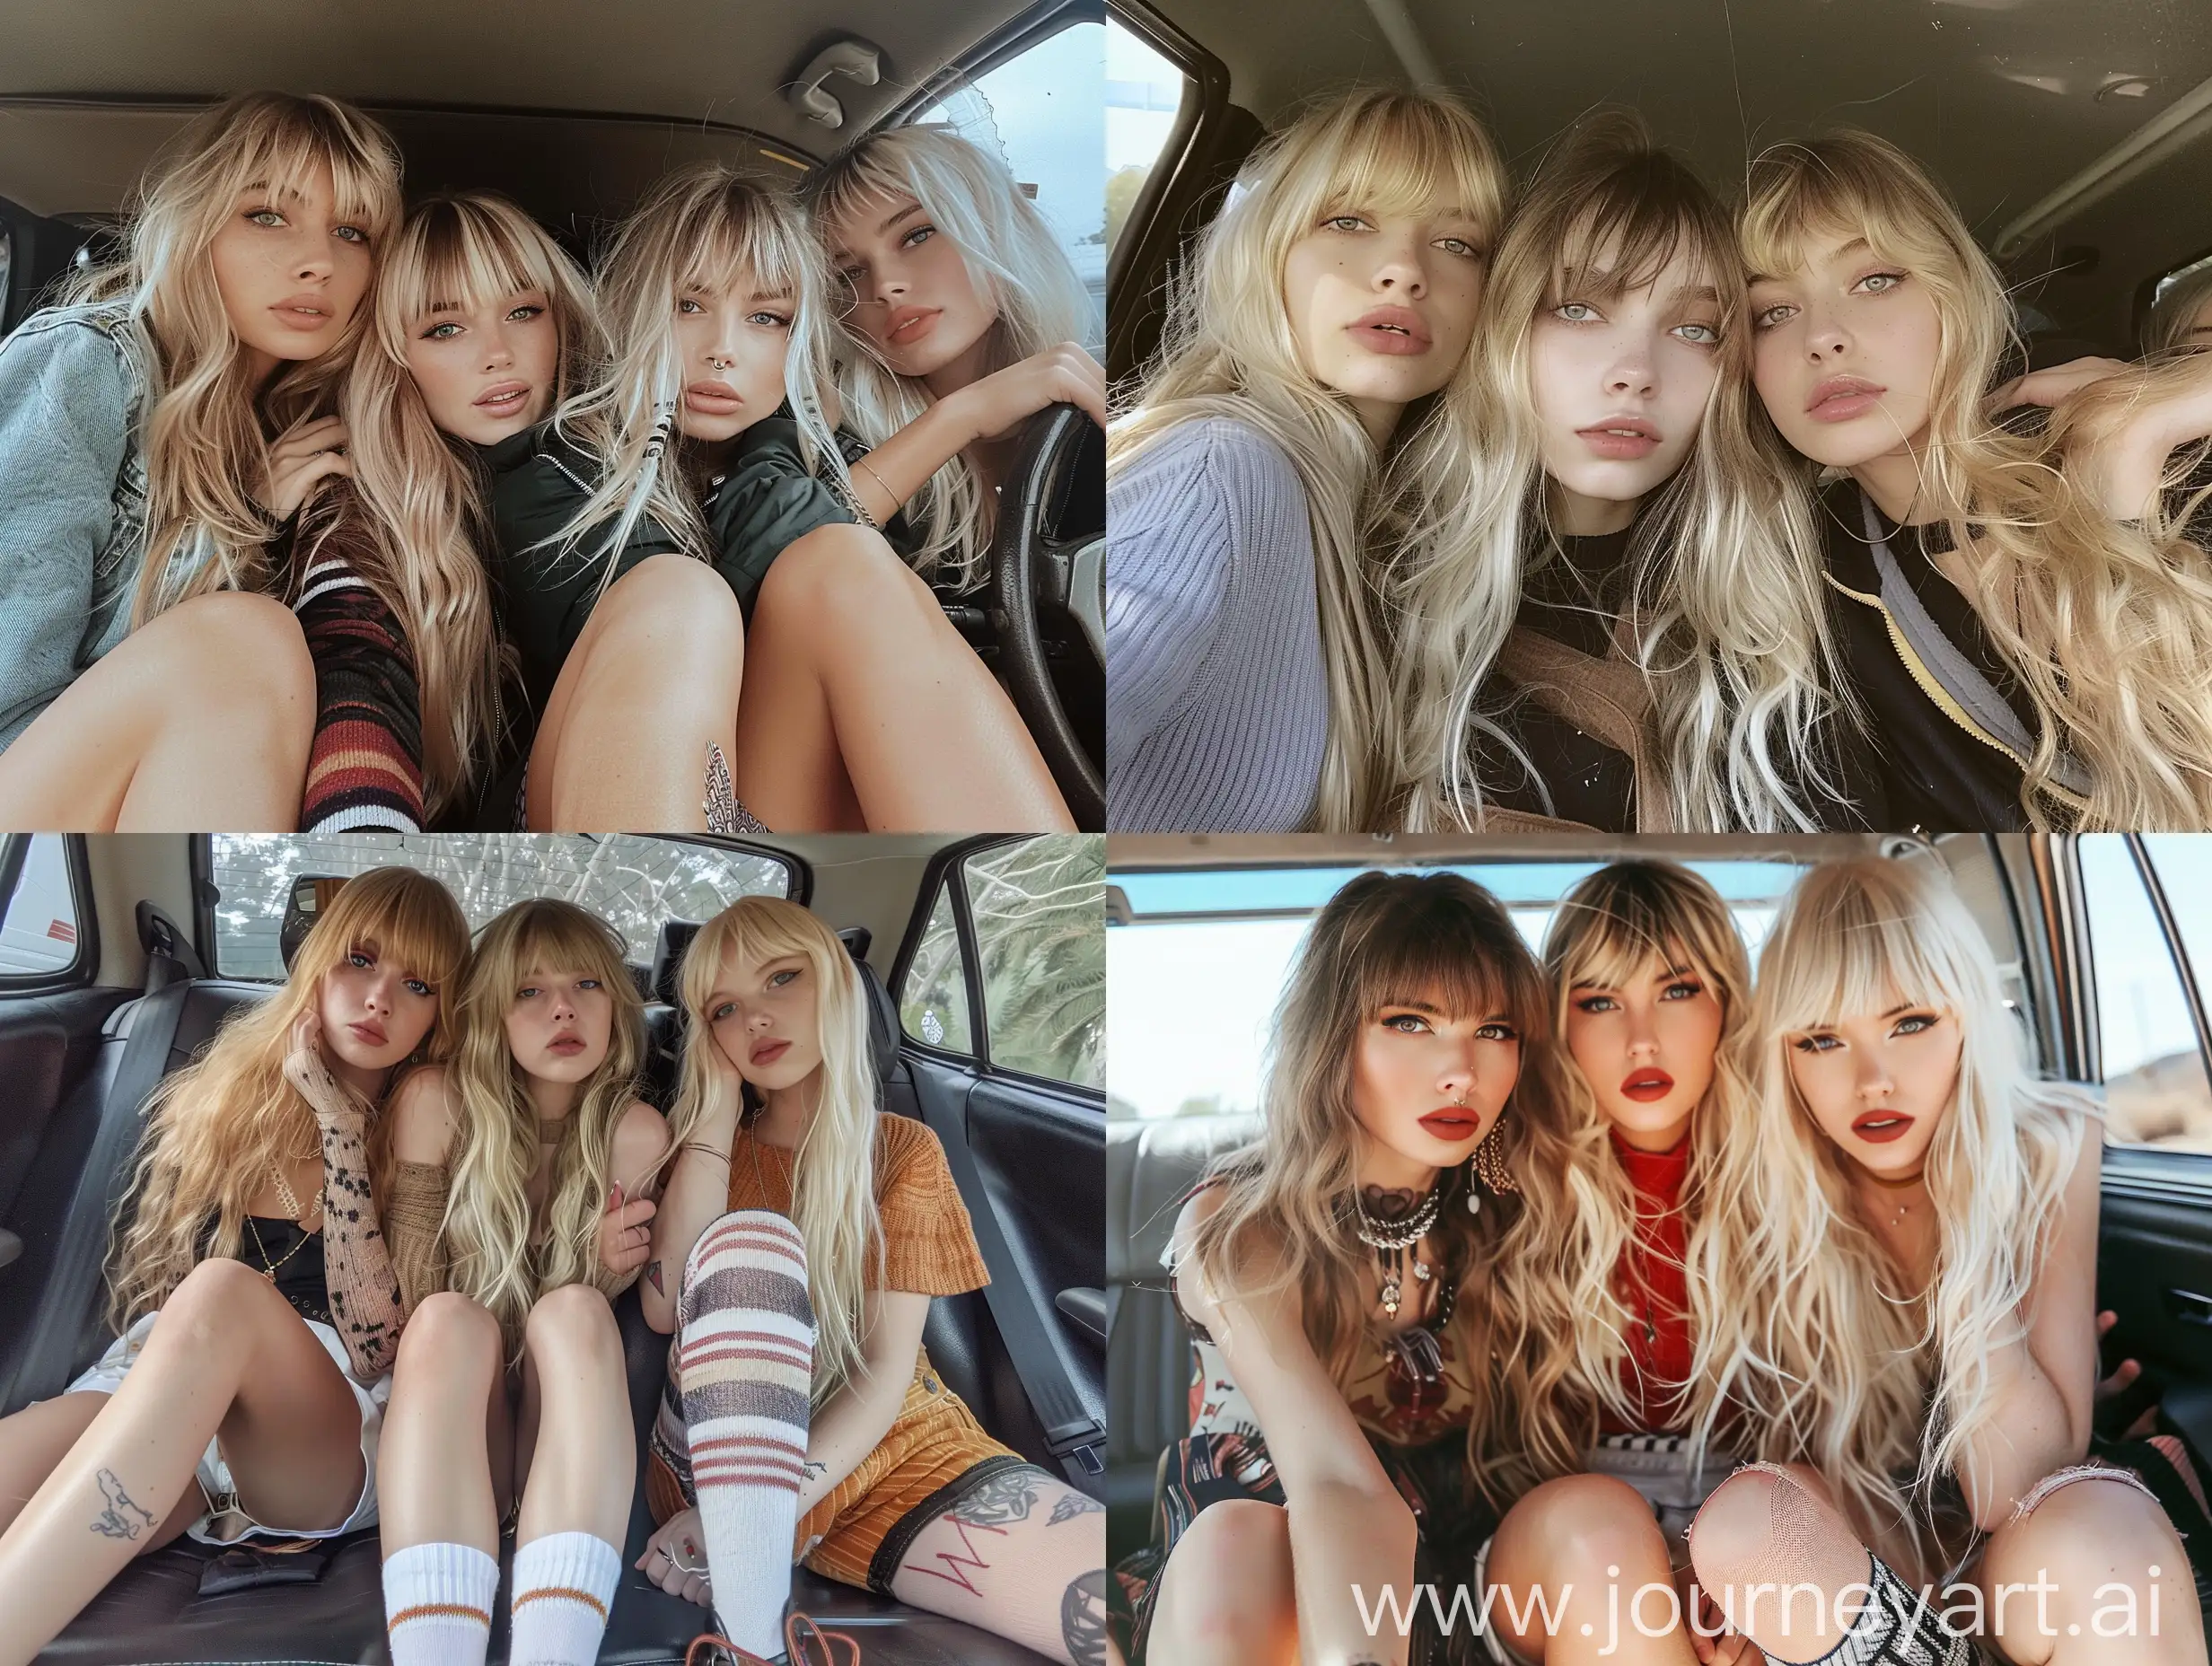 Three-Young-Women-with-Long-Blond-Hair-Taking-a-Natural-Selfie-in-a-Car